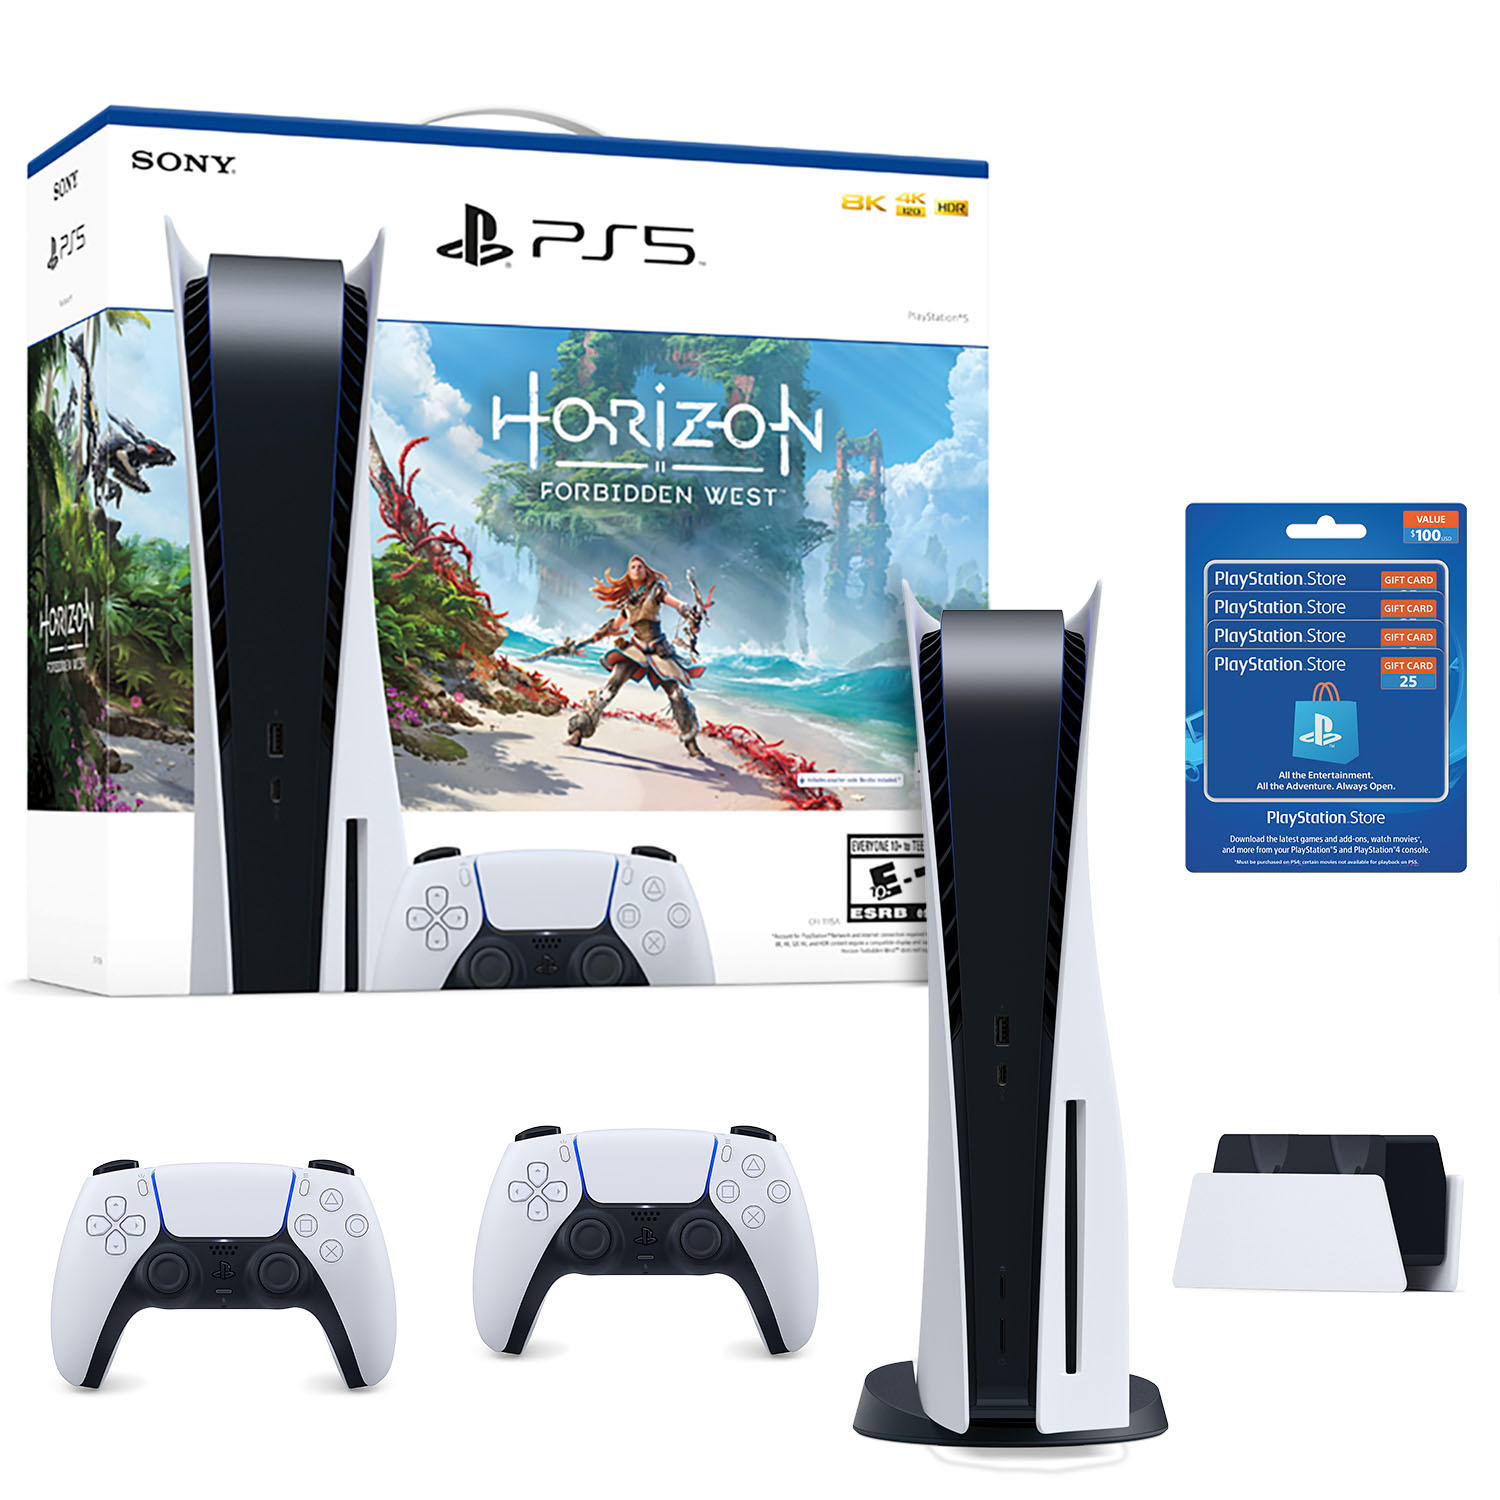 Sony PlayStation 5 PS5 Console Horizon Forbidden West Bundle, 2 Wireless DualSense Controllers, DualSense Charging Station, and 4 x $25 Playstation Store Gift Cards